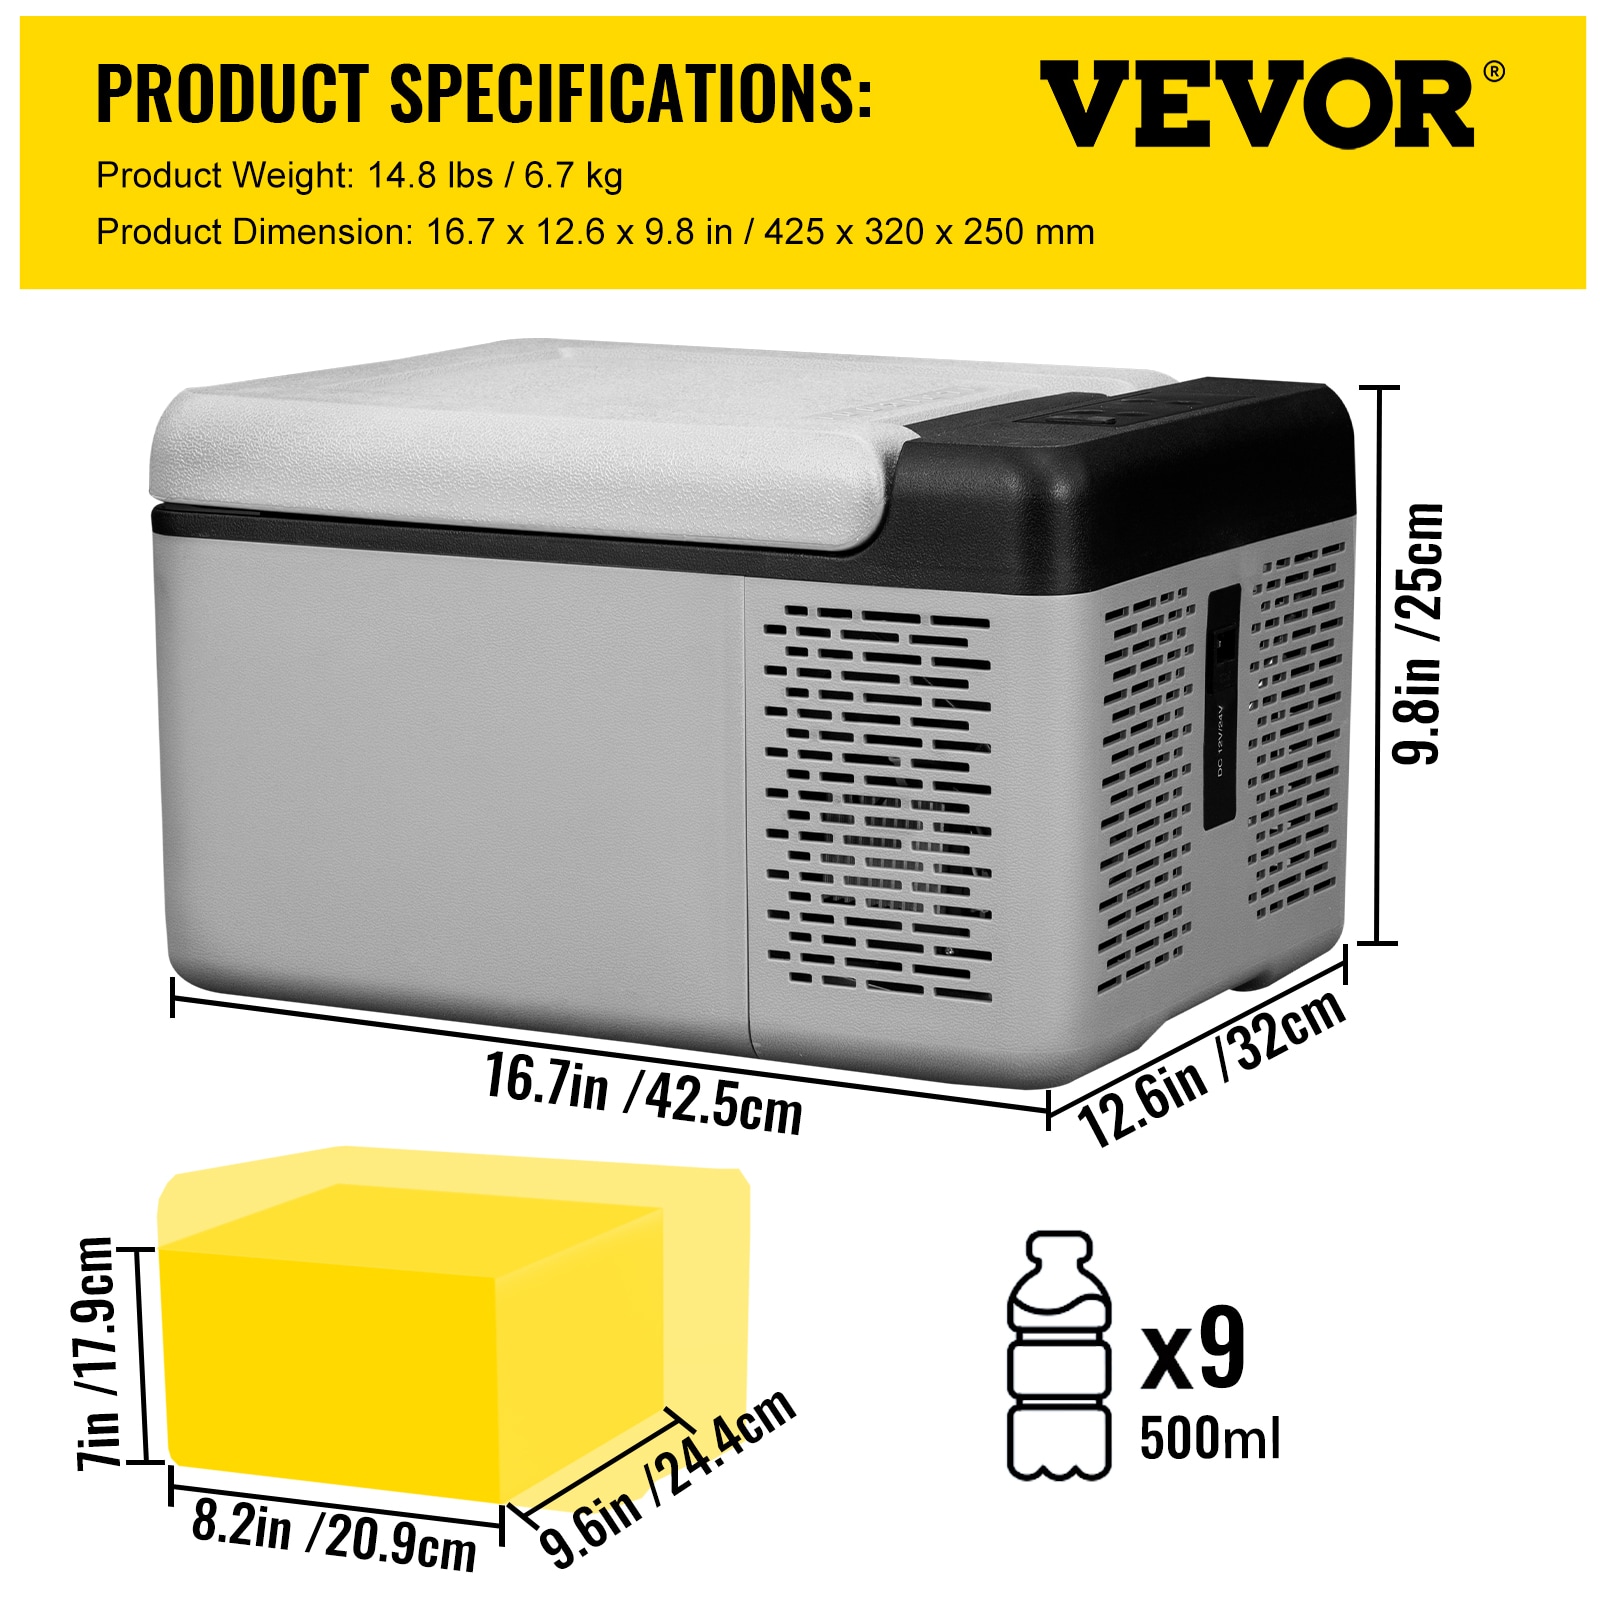 VEVOR 0.3178-cu ft Manual Defrost Chest Freezer (Silver) in the 